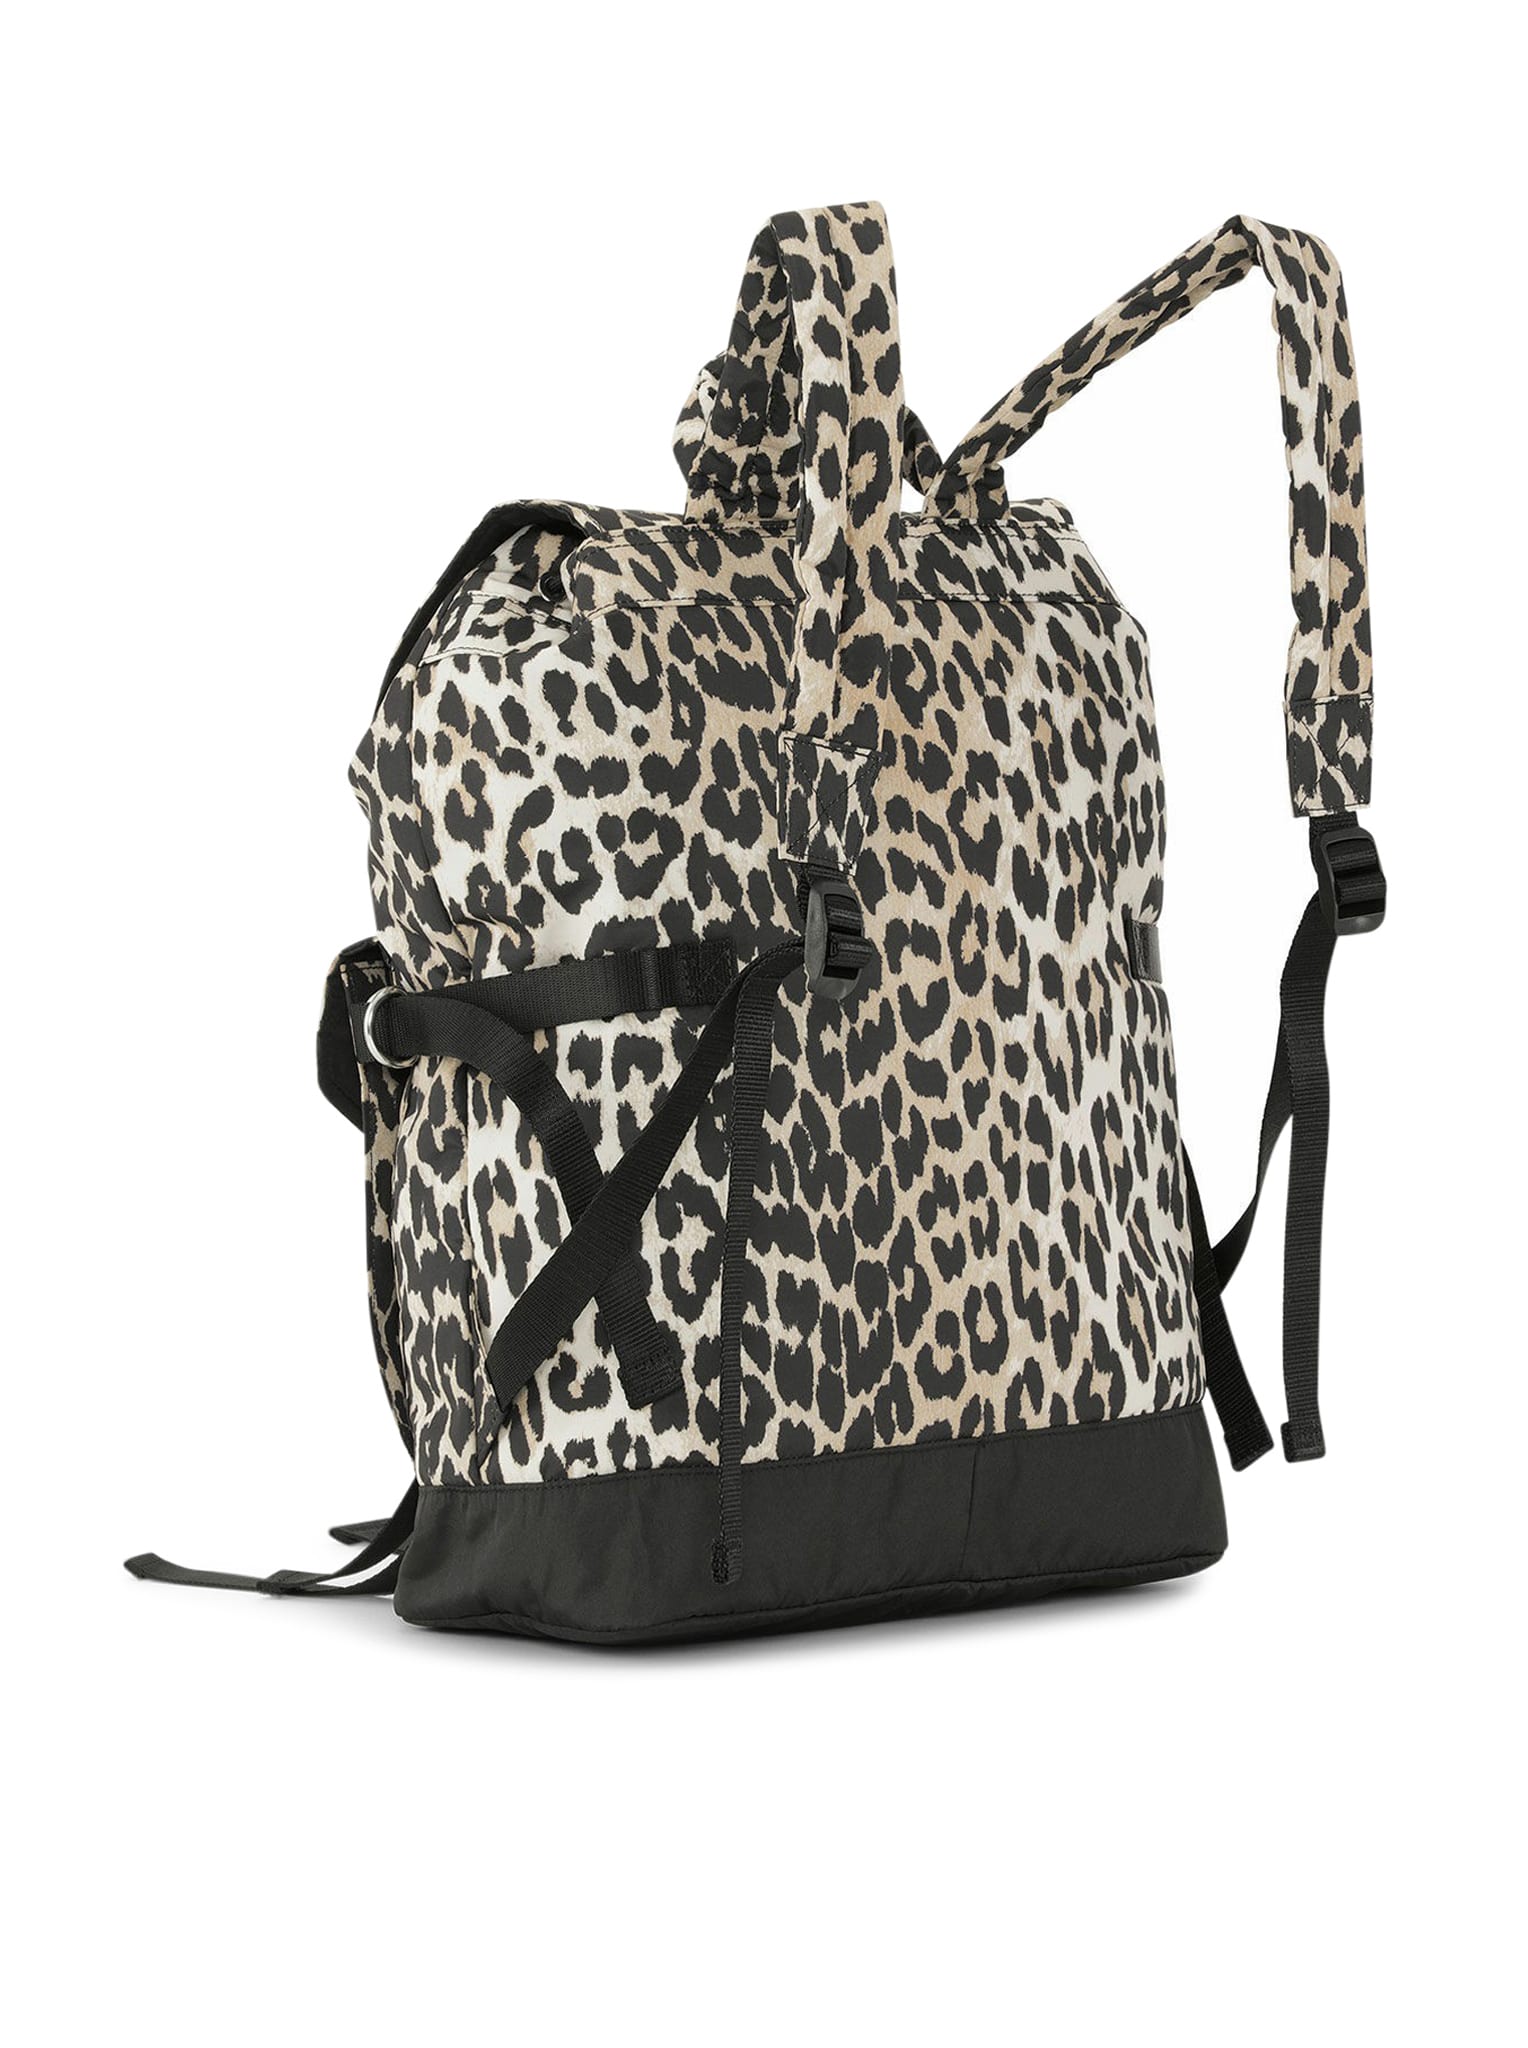 Shop Ganni Recycled Tech Backpack Print In Leopard